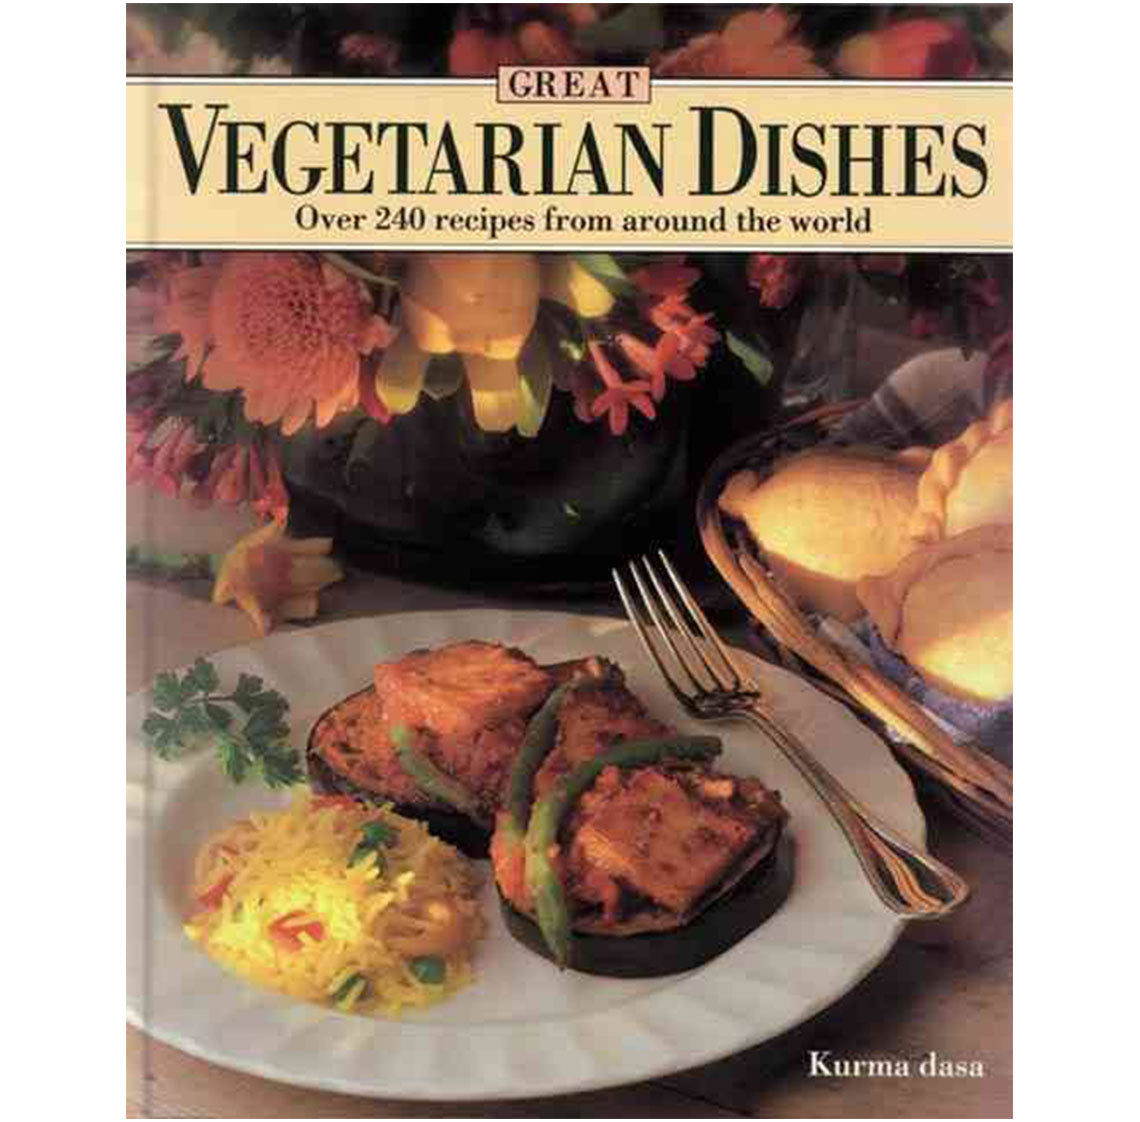 Great Vegetarian Dishes by Kurma Dasa- Over 240 Recipes From Around the World